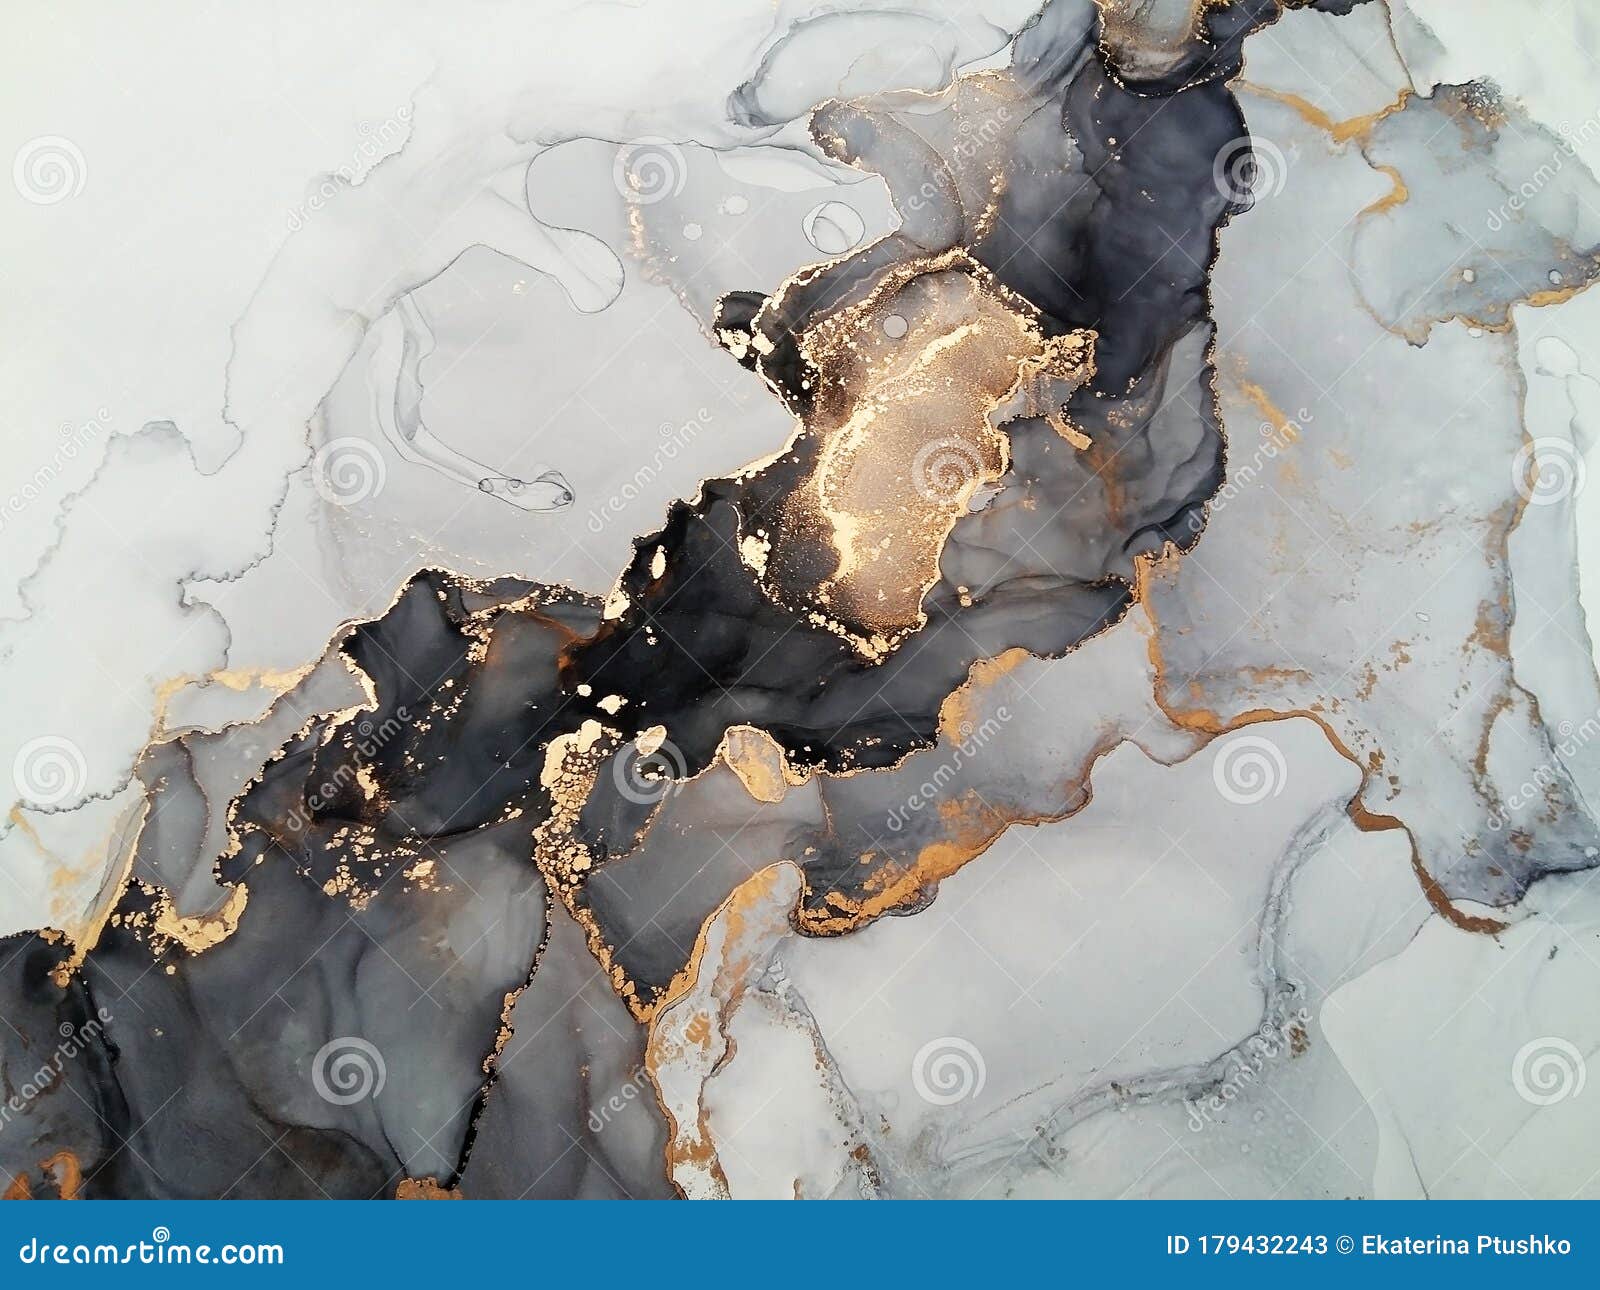 luxury abstract fluid art painting background alcohol ink technique black shades of gray and gold. rough edges of paint flow out